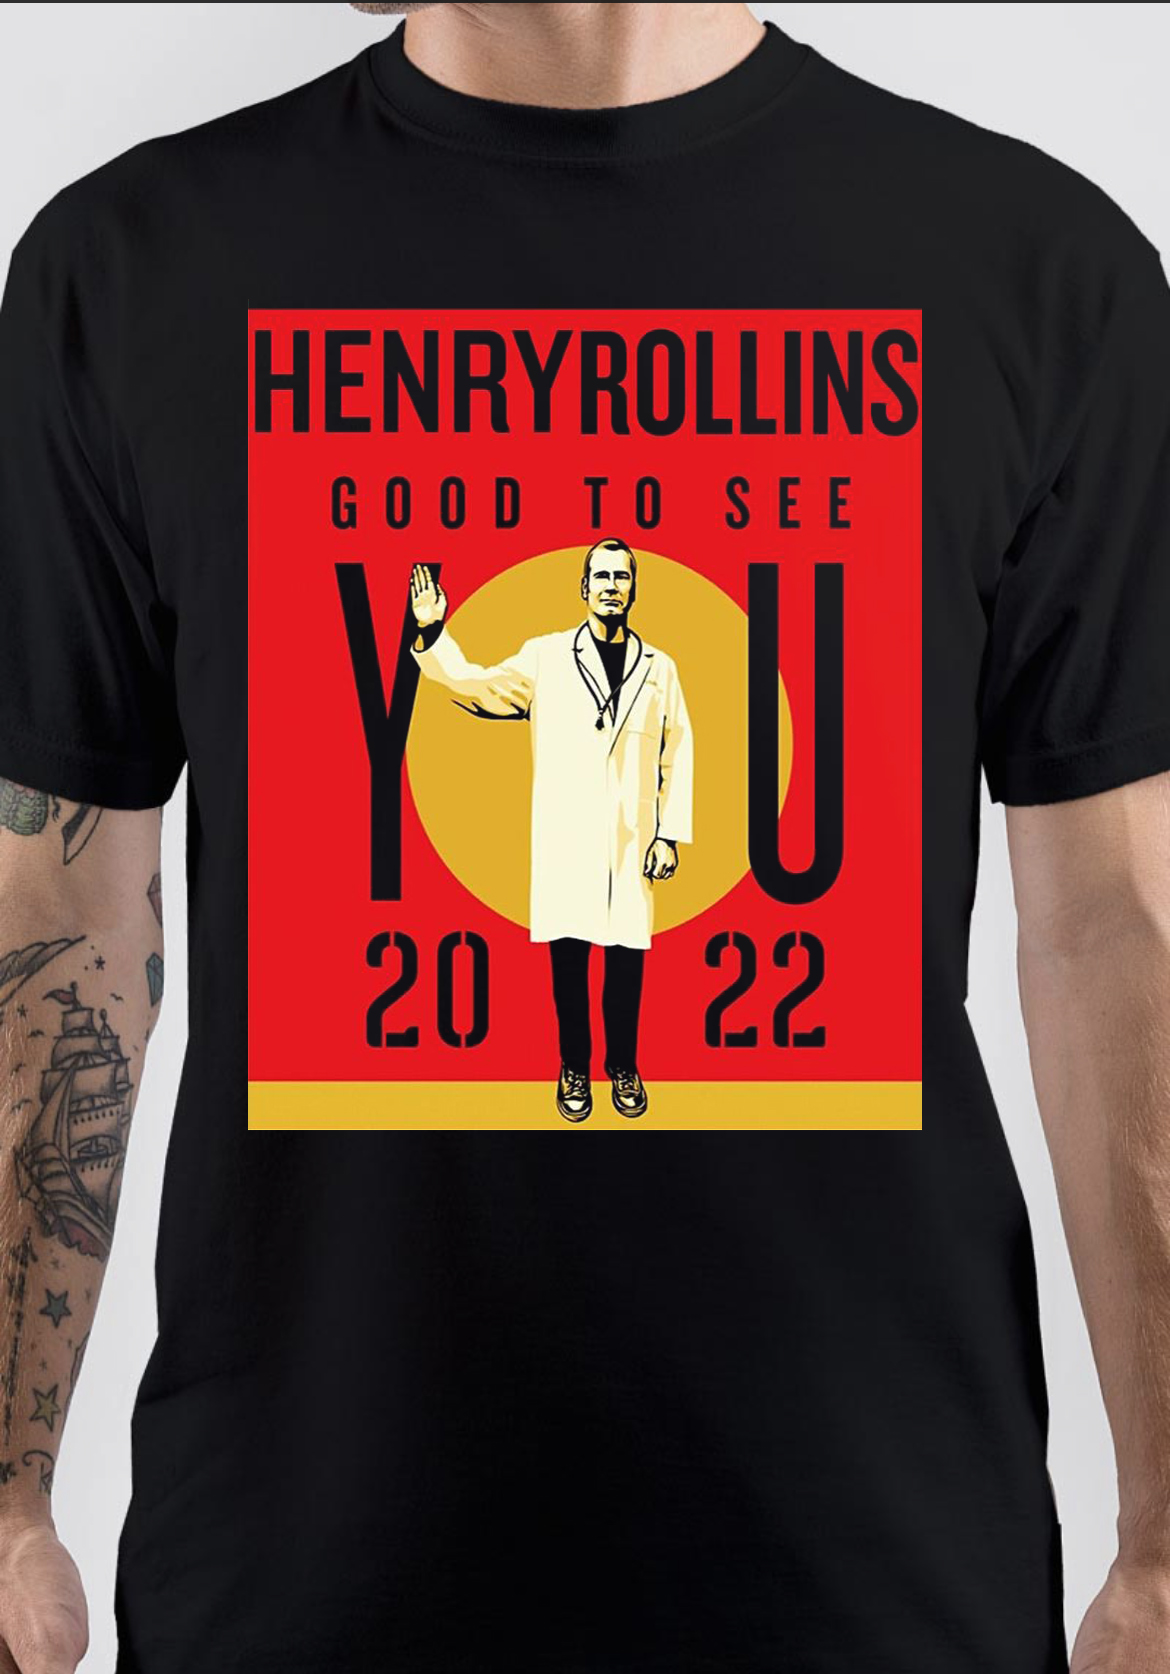 Henry Rollins T-Shirt And Merchandise